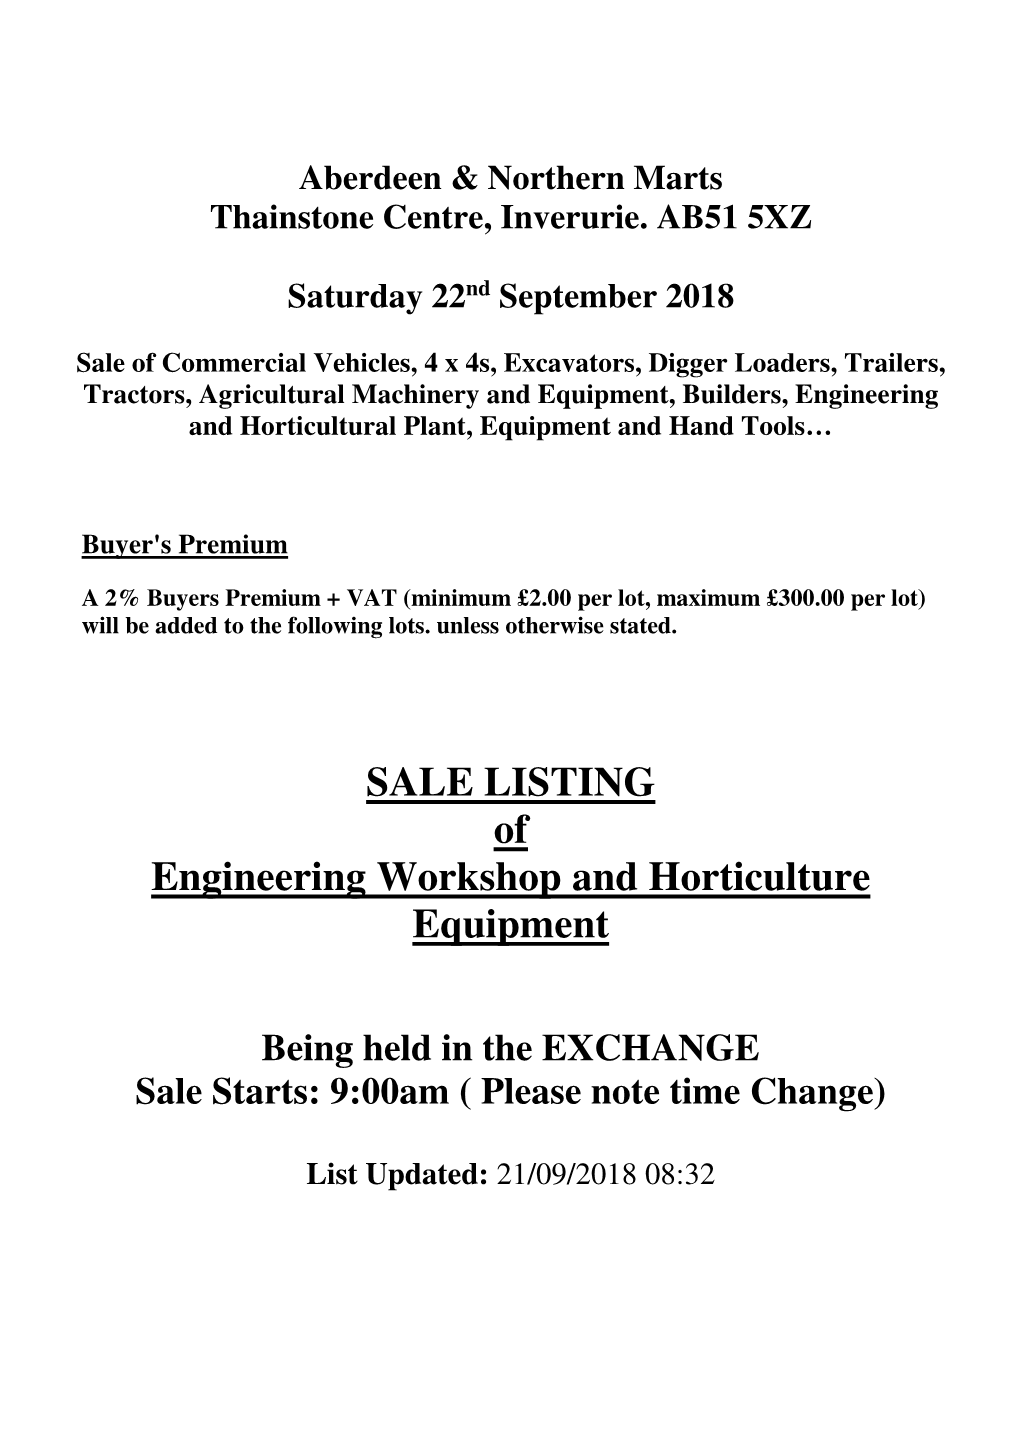 SALE LISTING of Engineering Workshop and Horticulture Equipment